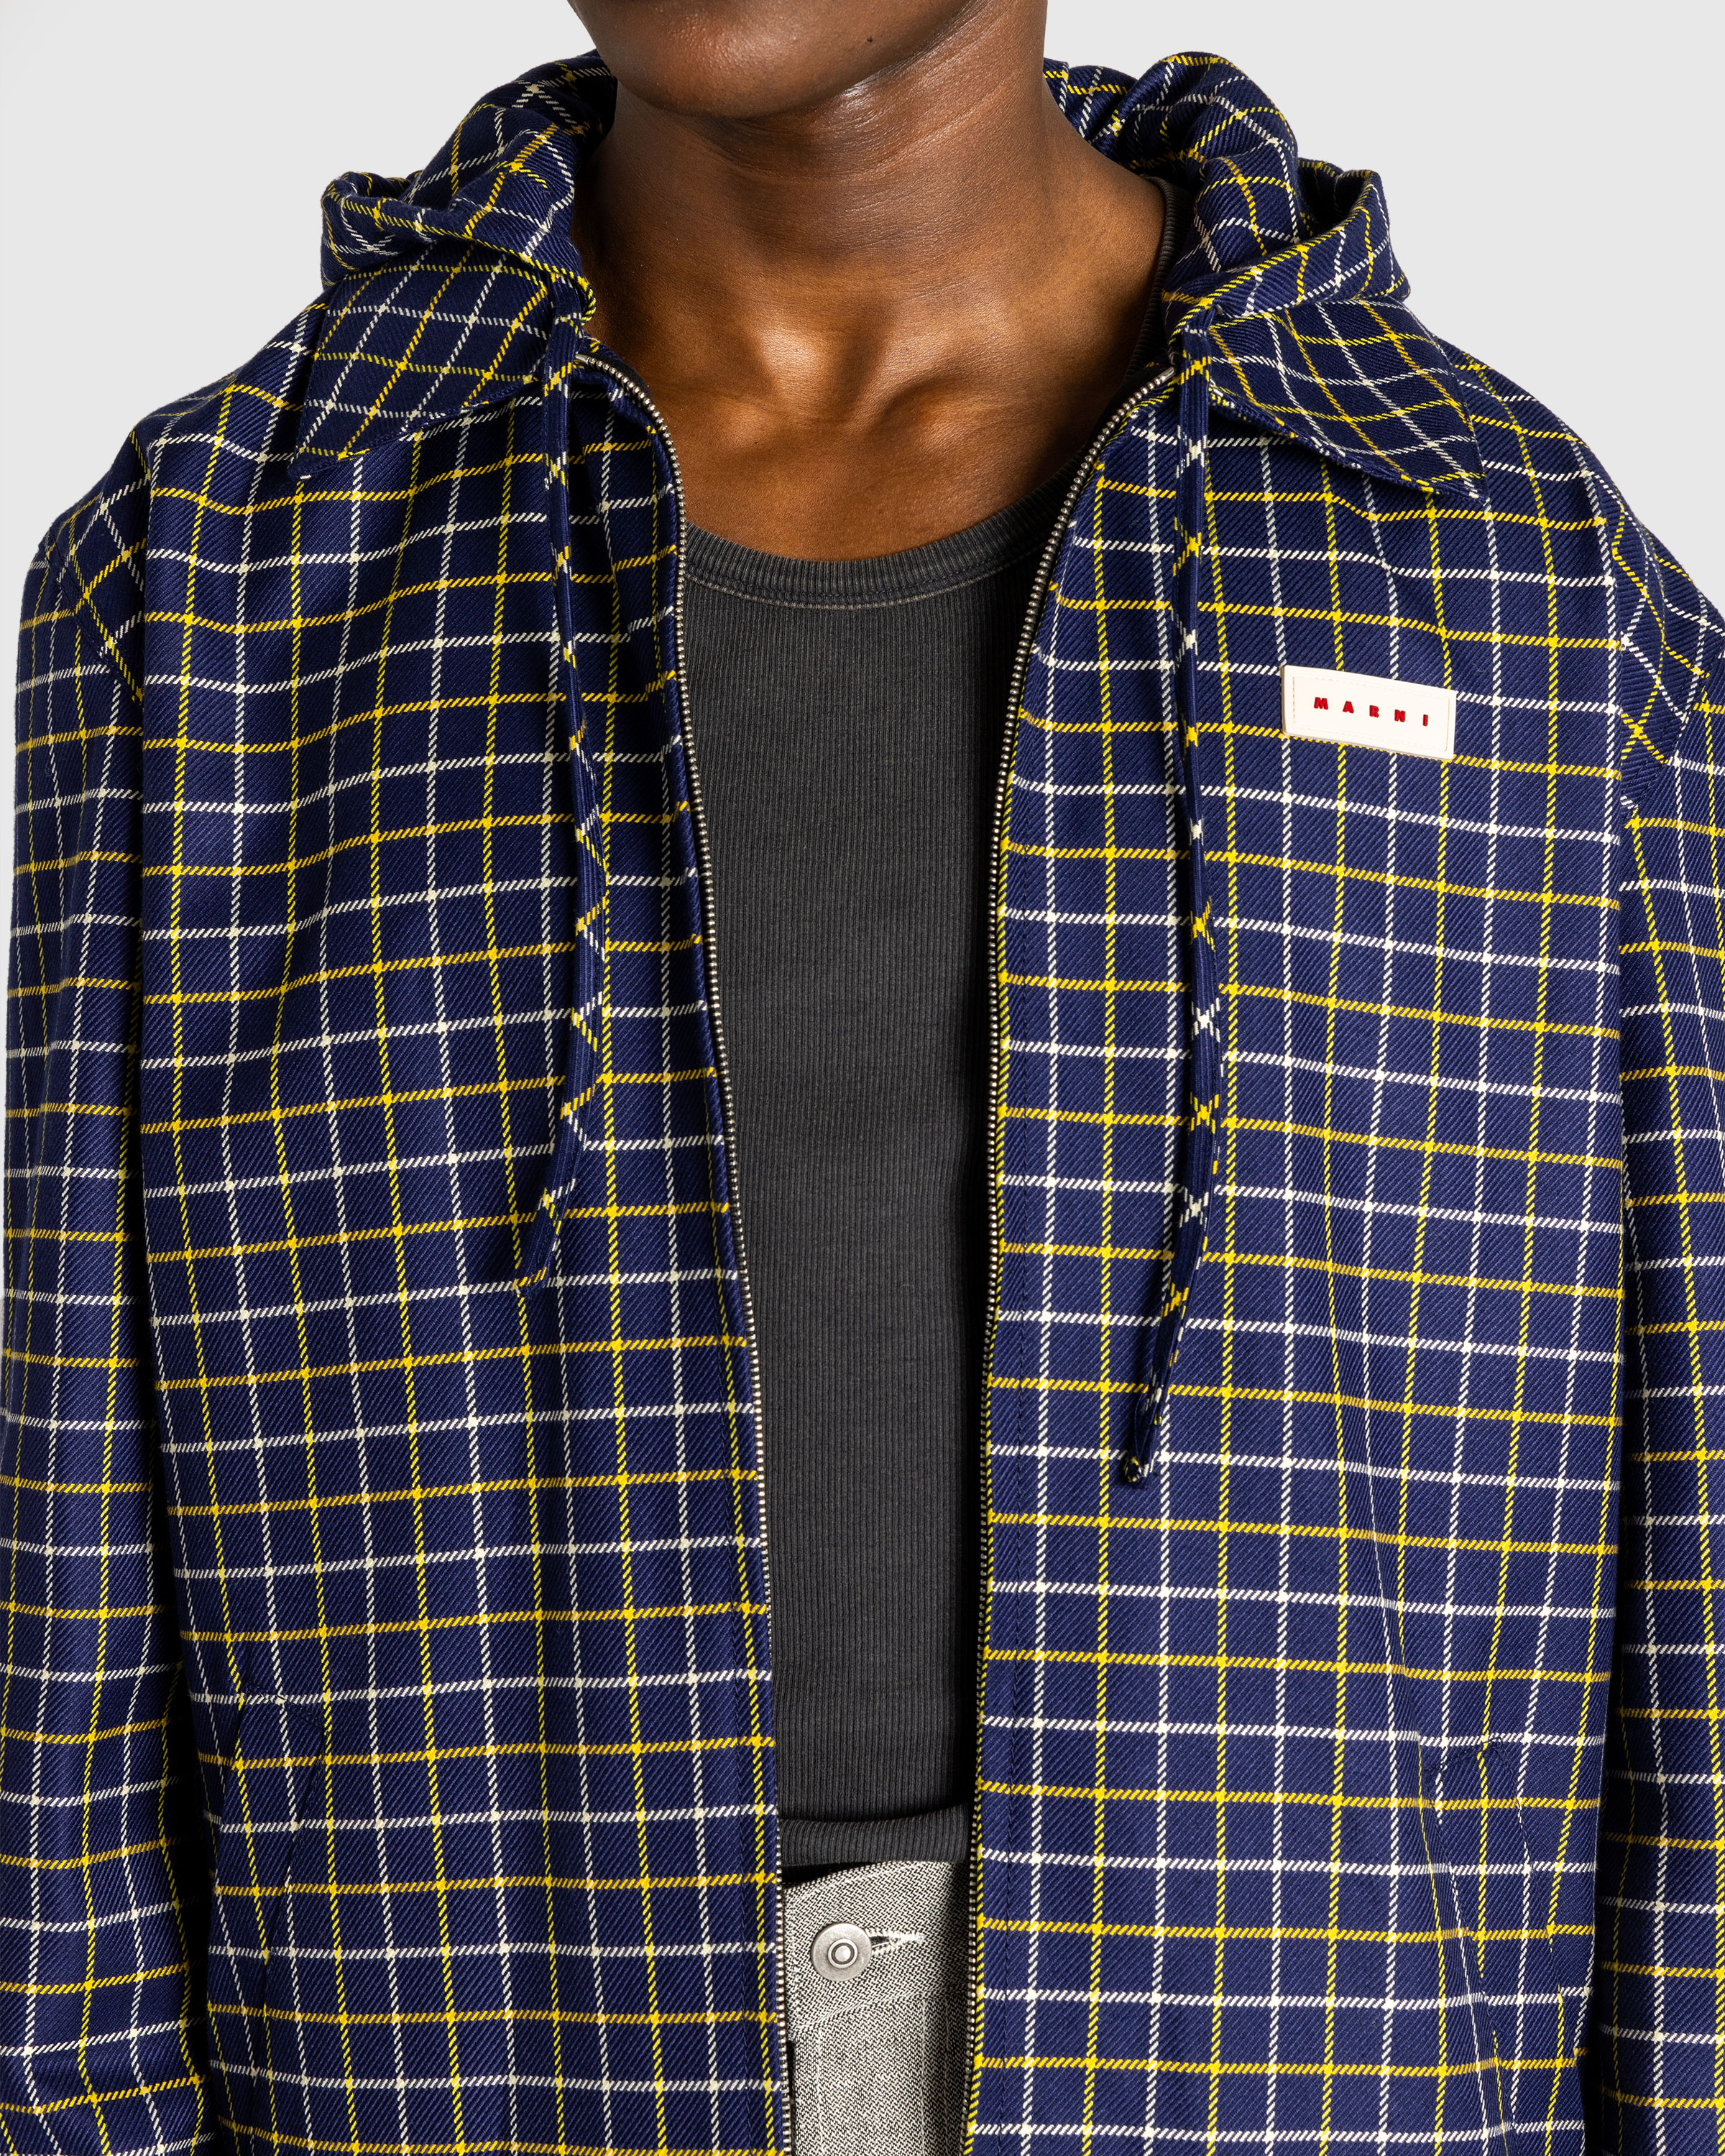 Marni – Checked Wool and Cotton Overshirt Blumarine - Outerwear - Blue - Image 5